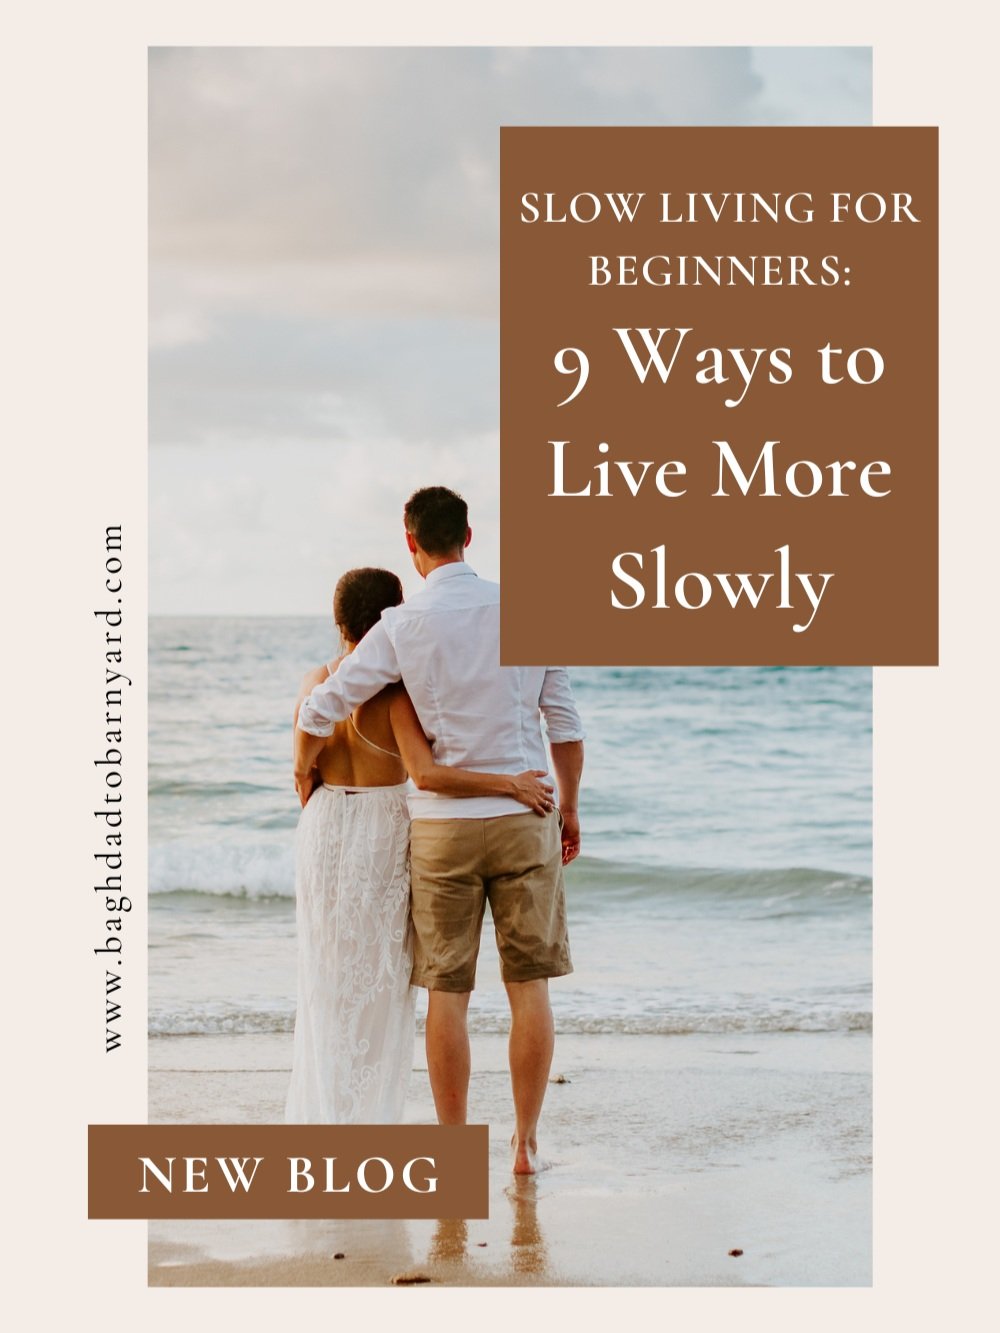 Slow Living for Beginners: couple on the beach watching the ocean